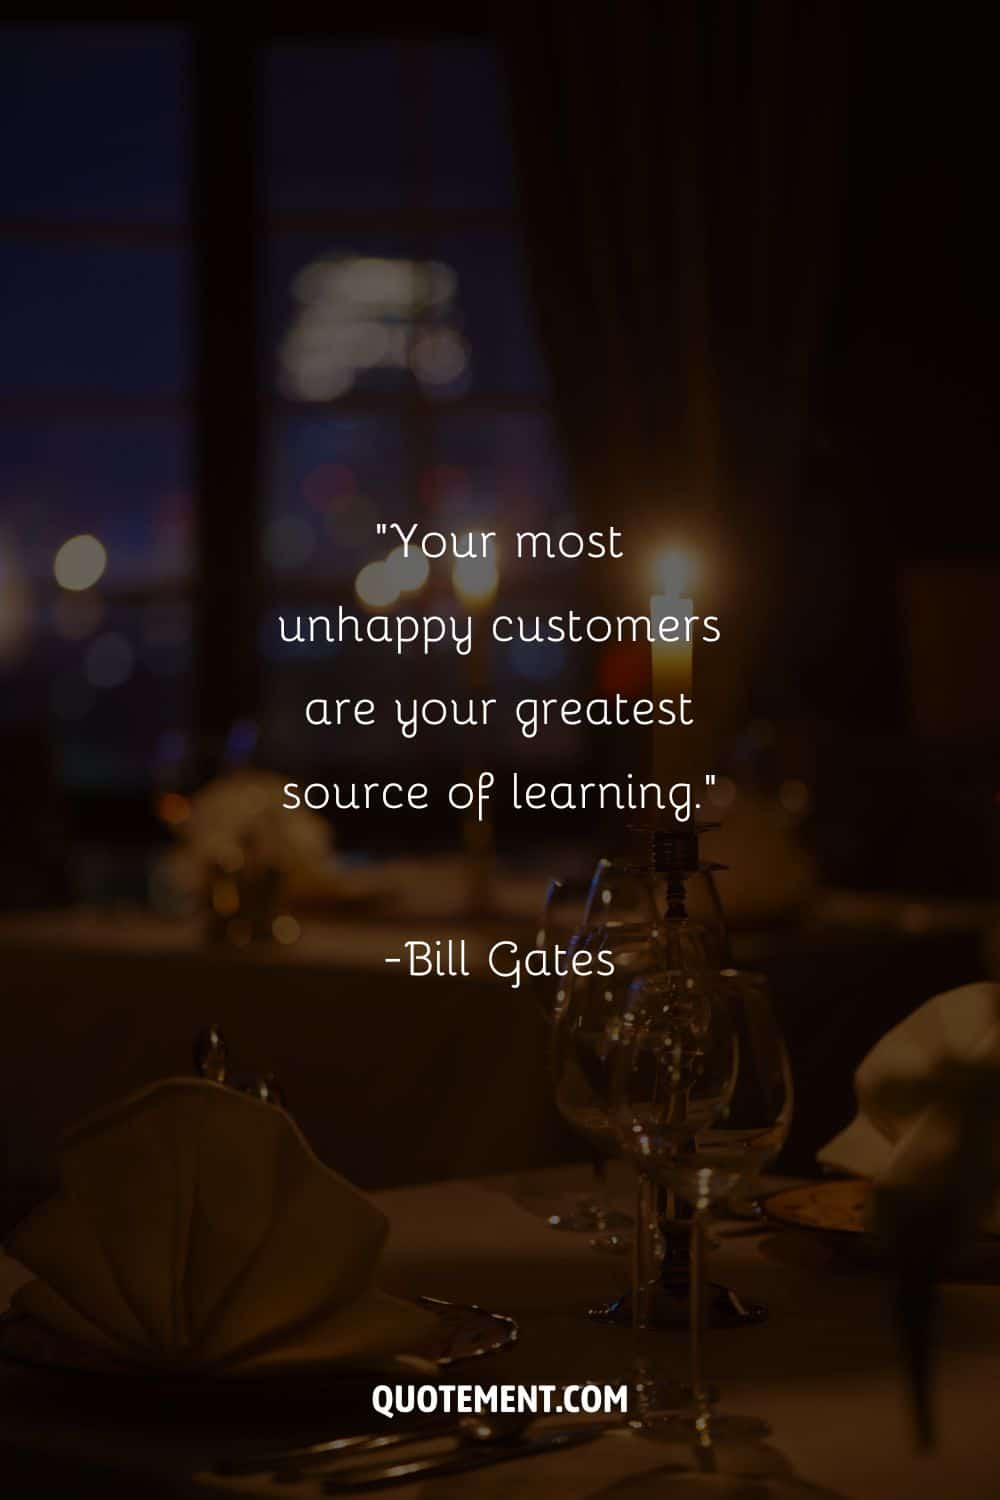 Restaurant table image representing a quote on unhappy customers.